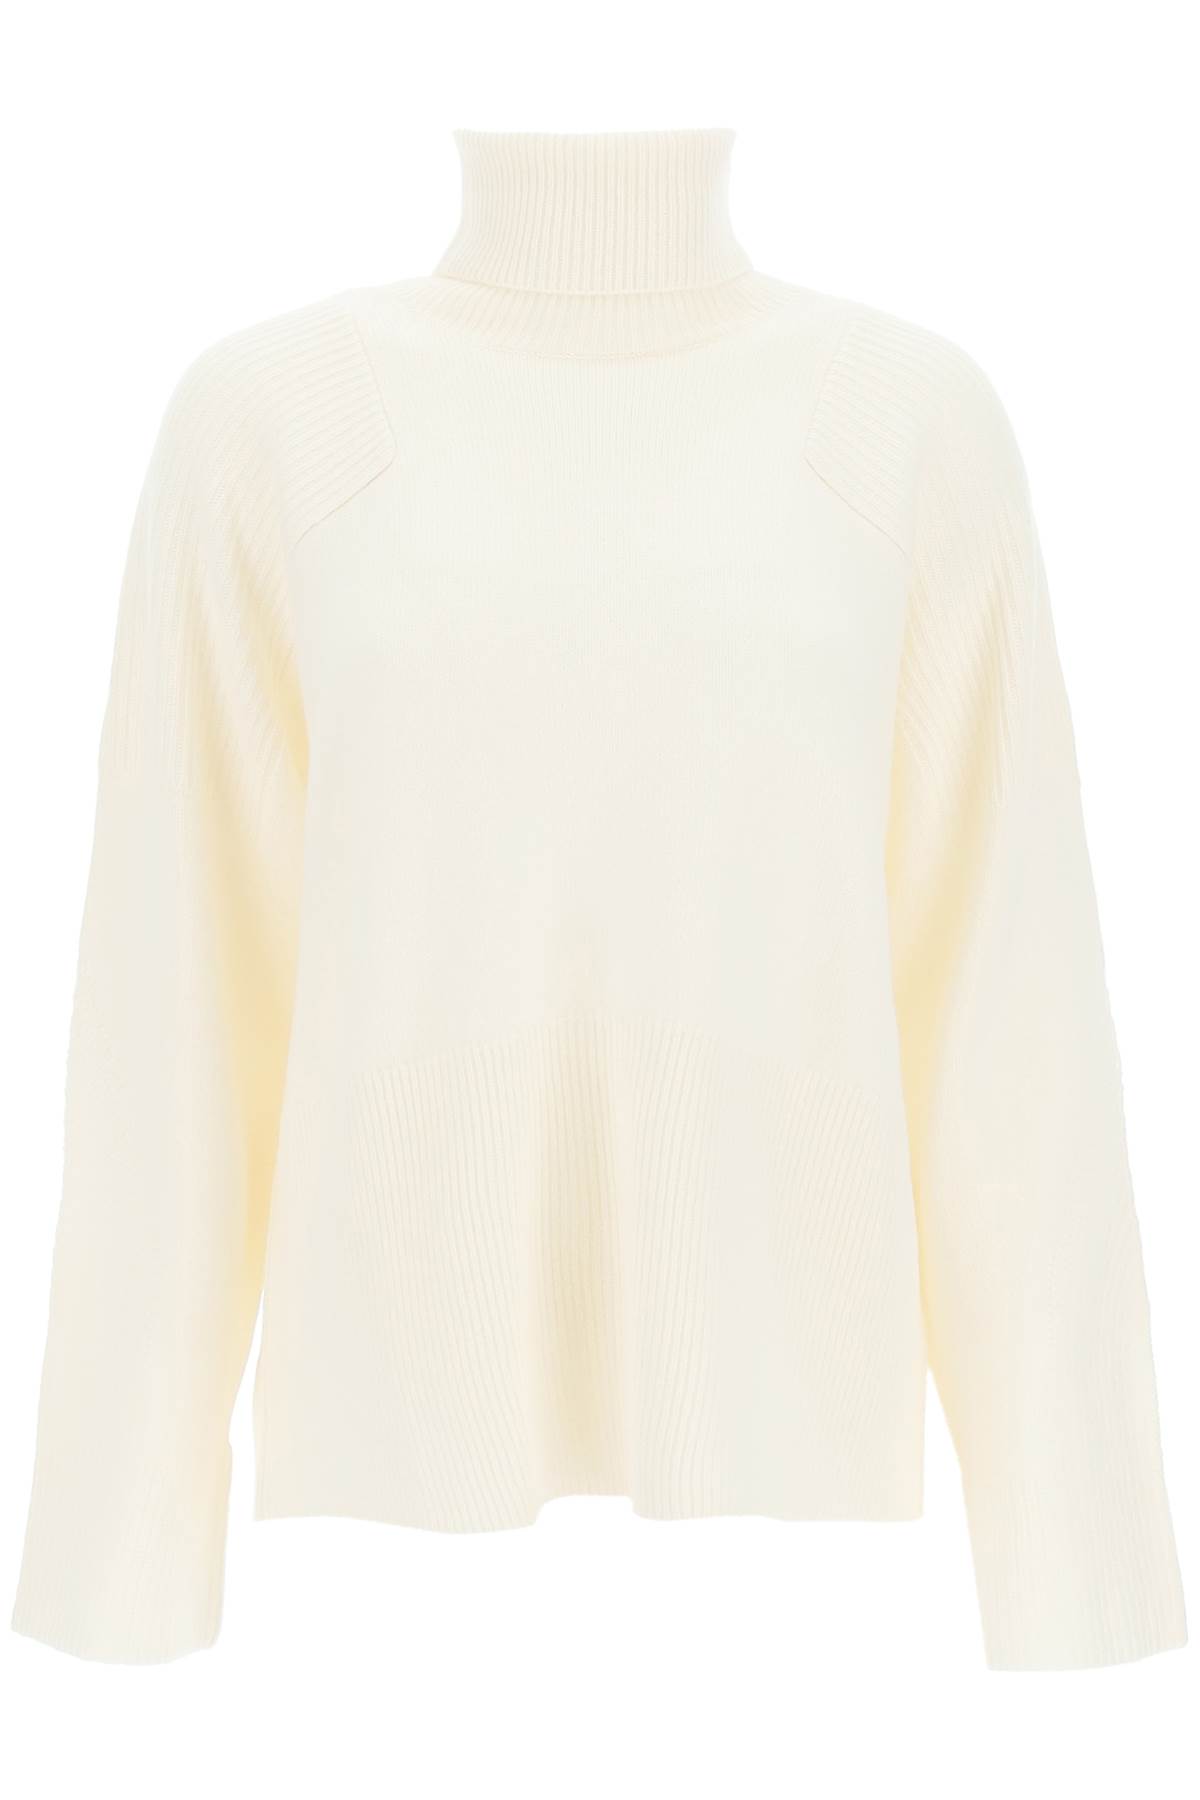 Loulou Studio maren Turtleneck Cashmere Sweater With Ribbed Detailing